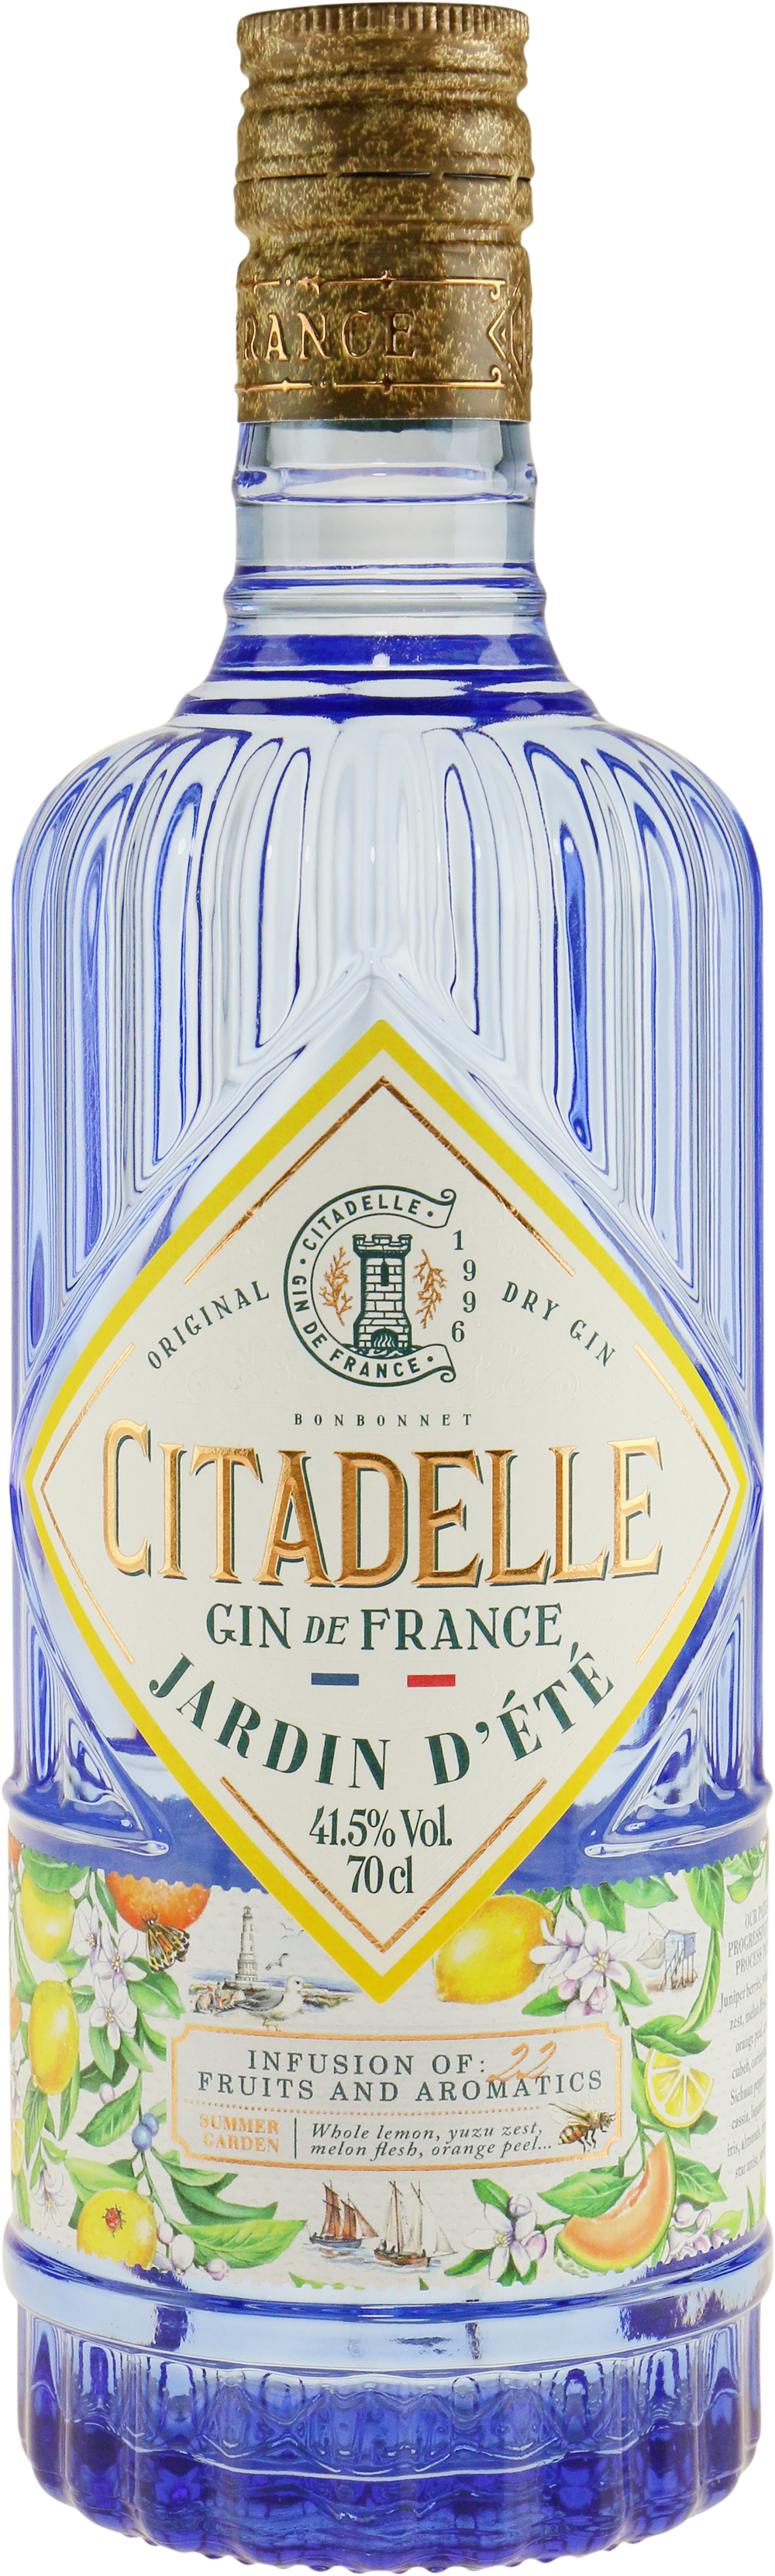 Deals on Citadelle Jardin D`ete Gin from Calle at 30,74 €